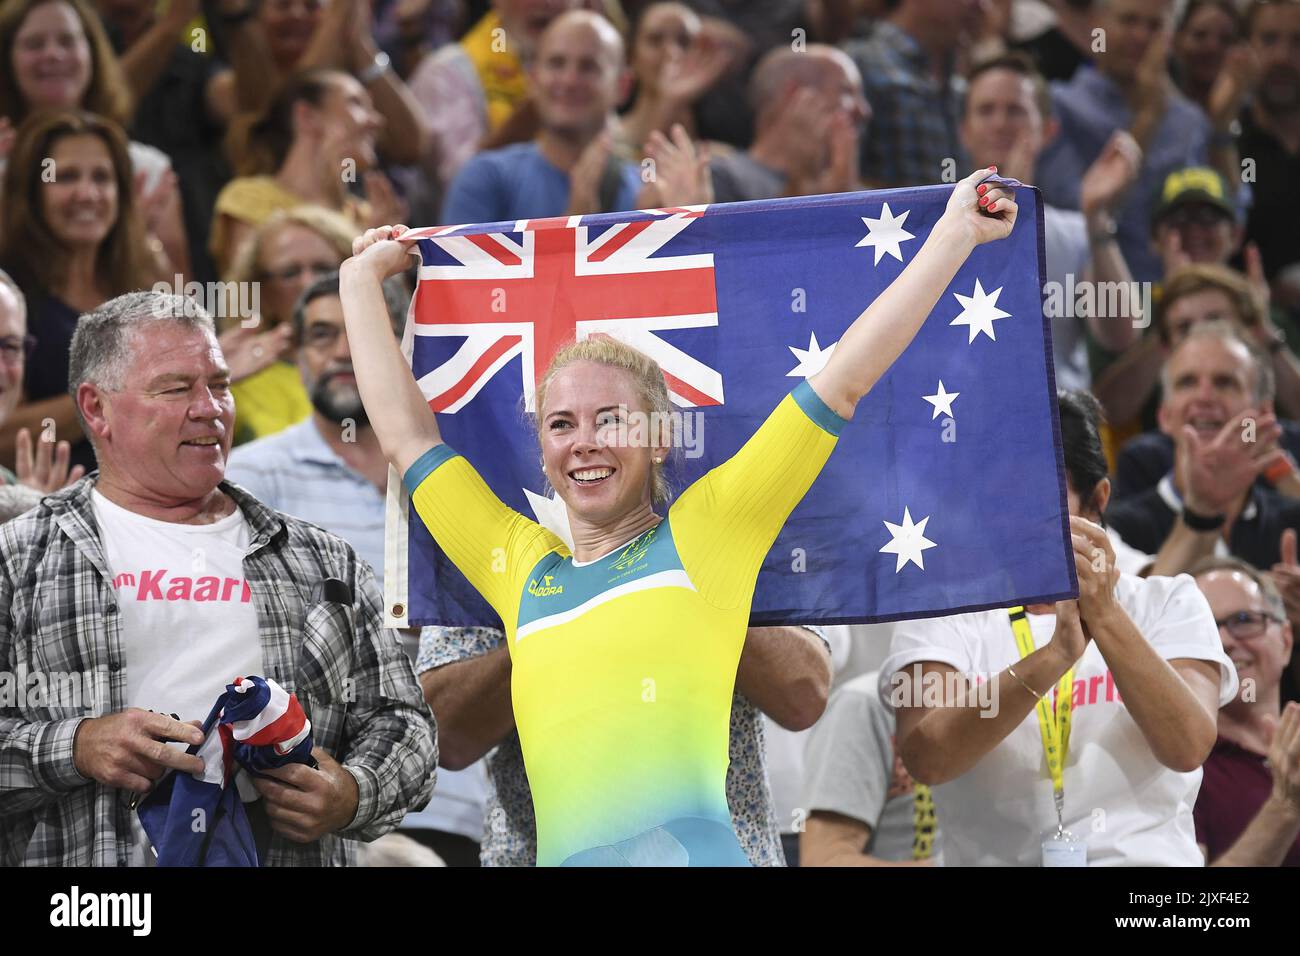 Kaarle McCulloch of Australia celebrates after winning the gold medal in  the Women's 500m Time Trial Final on day three of the track cycling  competition at the XXI Commonwealth Games at the